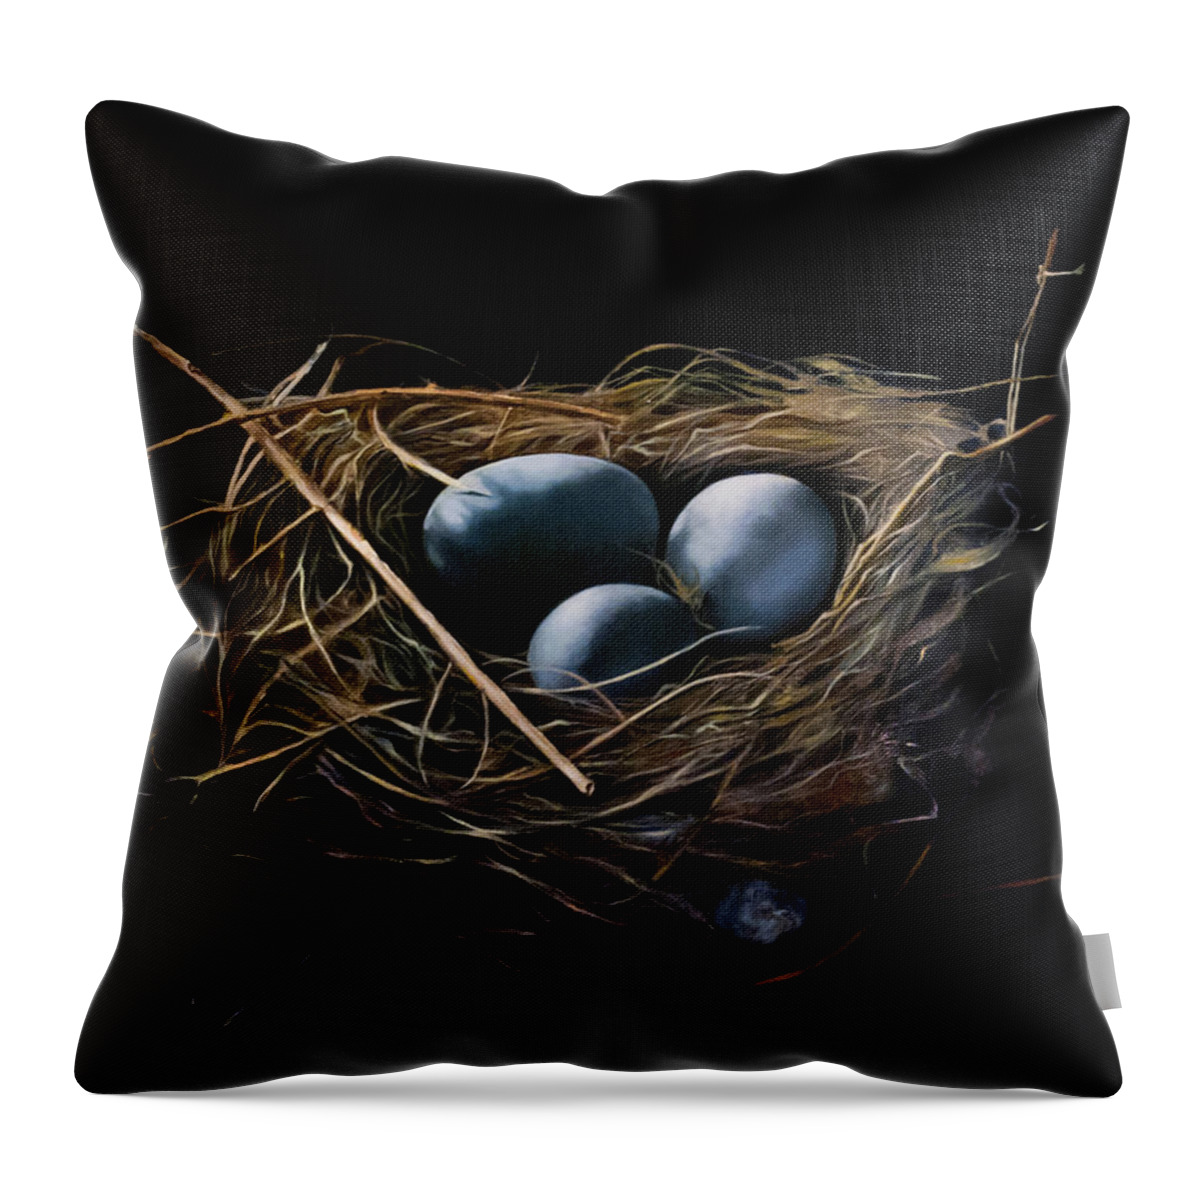 Bird Eggs Throw Pillow featuring the painting Home by Anthony Enyedy